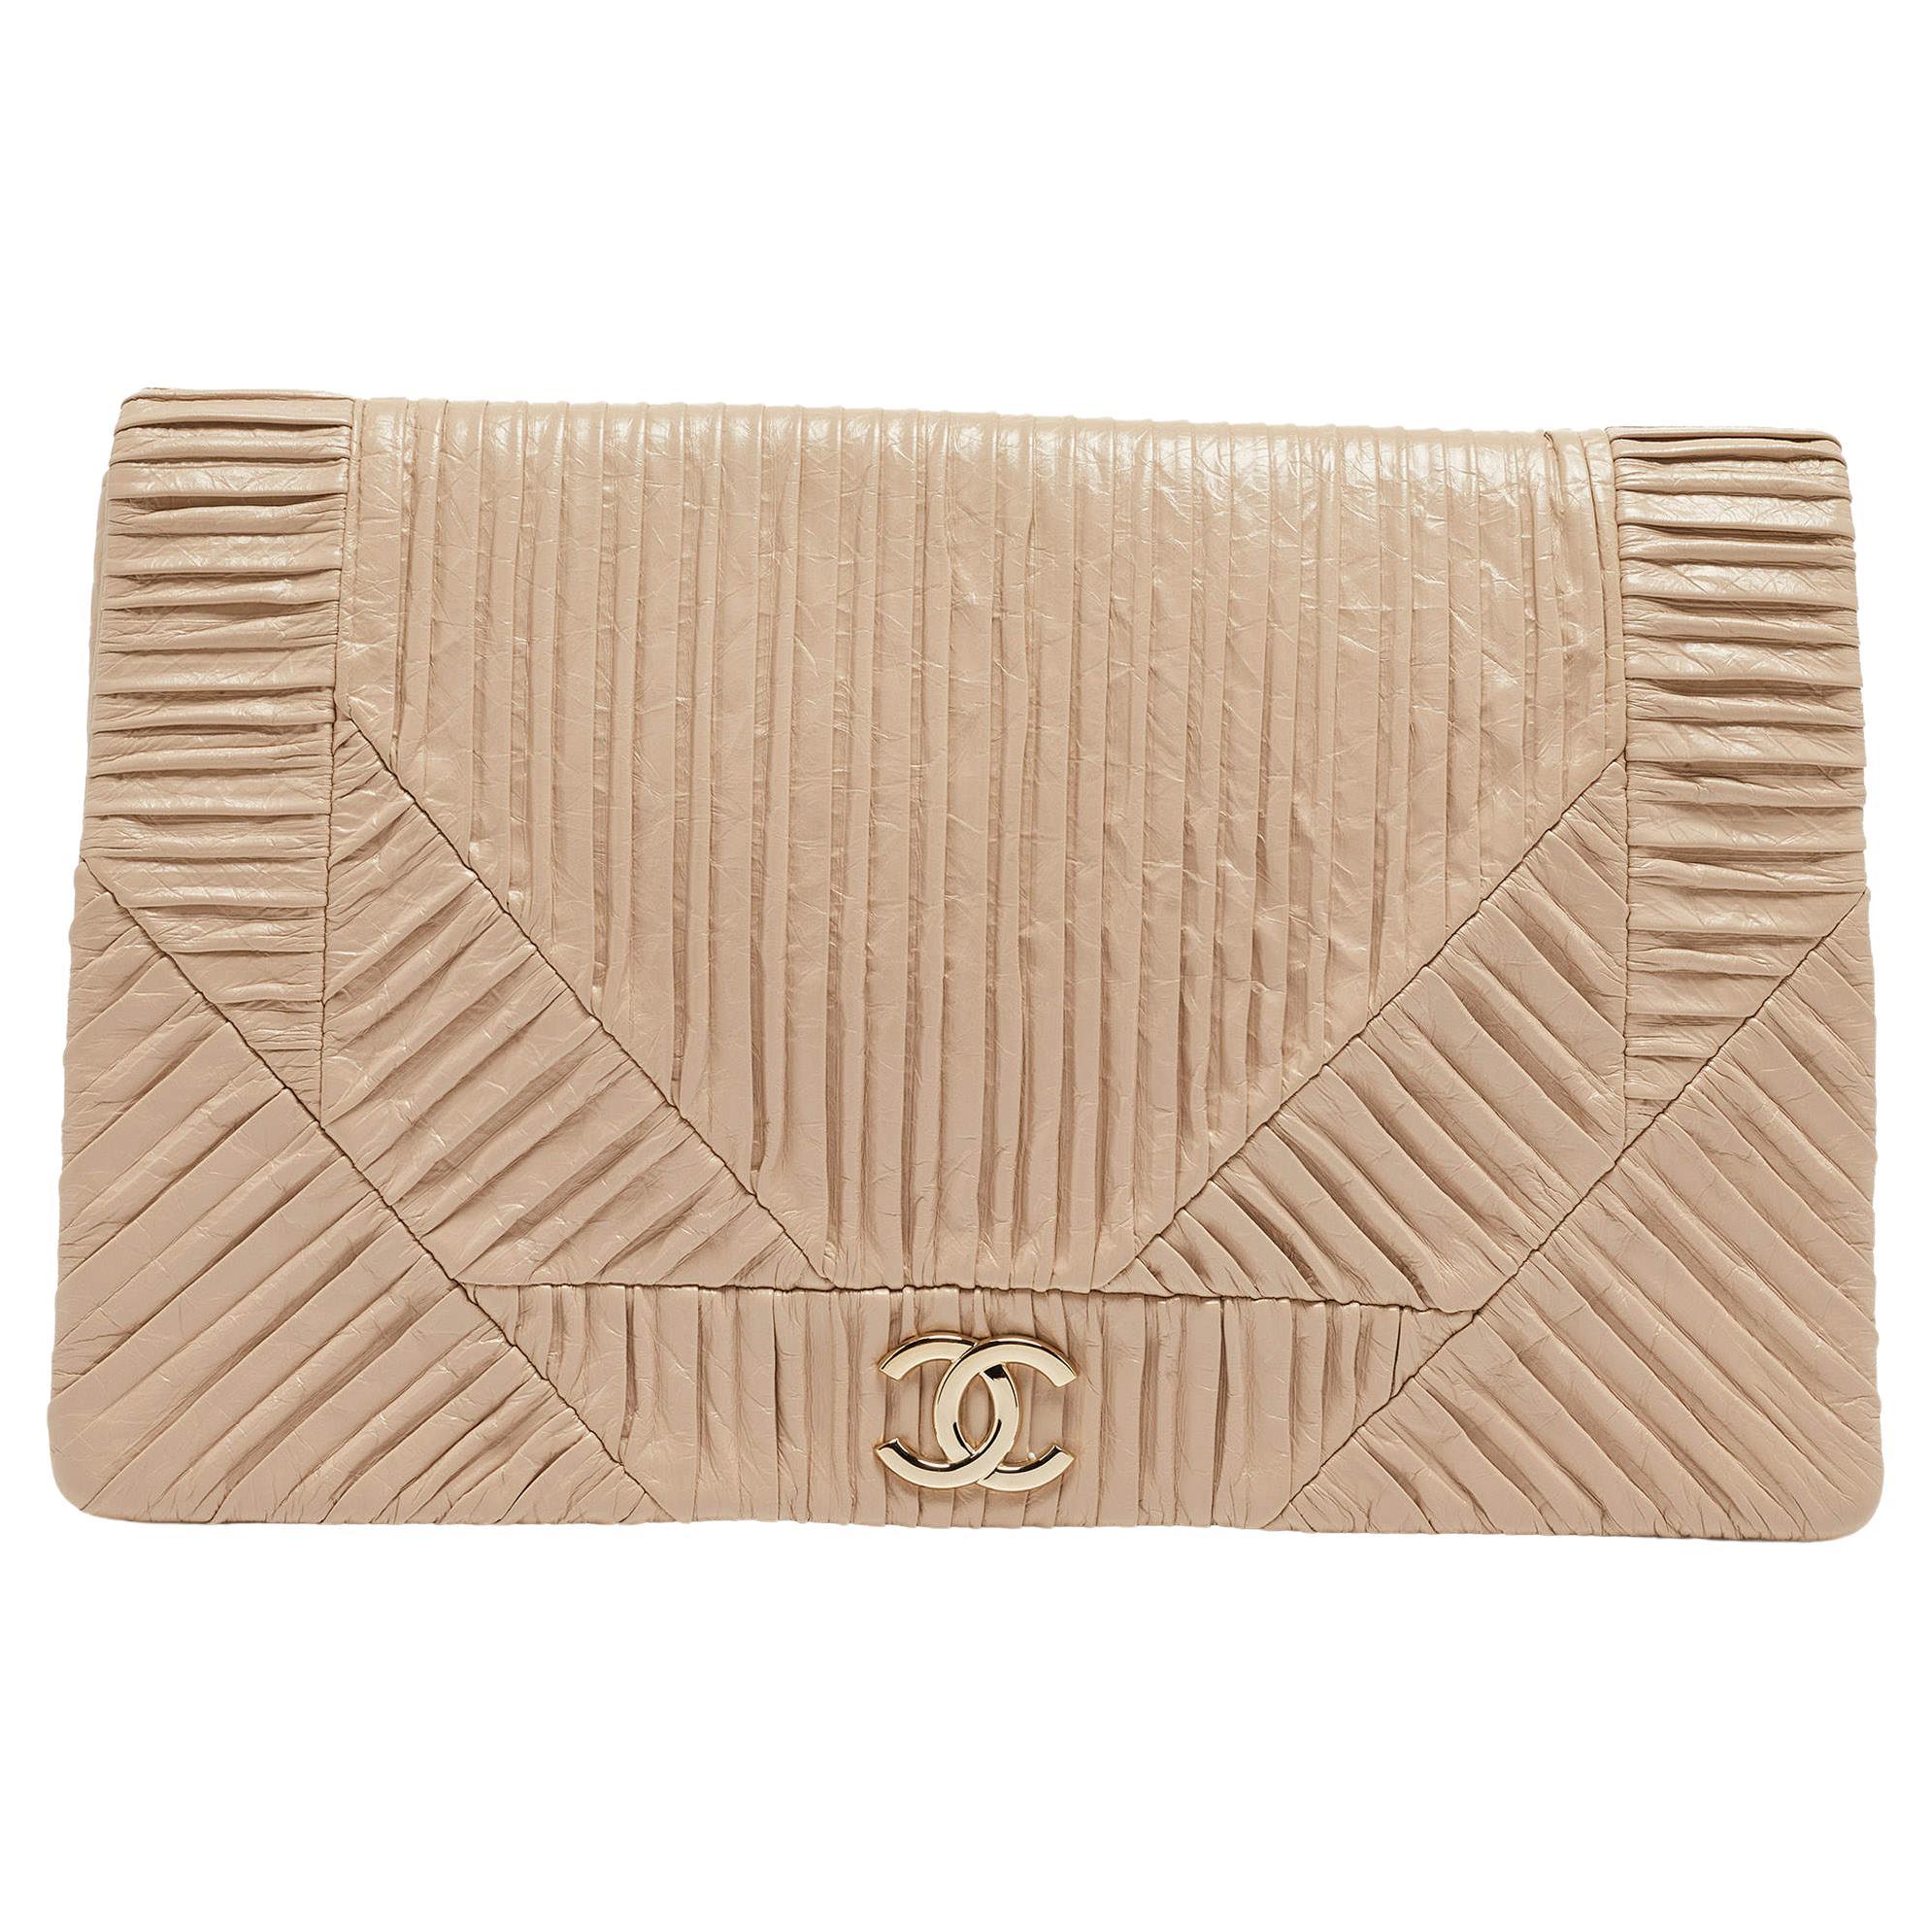 Chanel Beige Leather Coco Pleats Flap Clutch